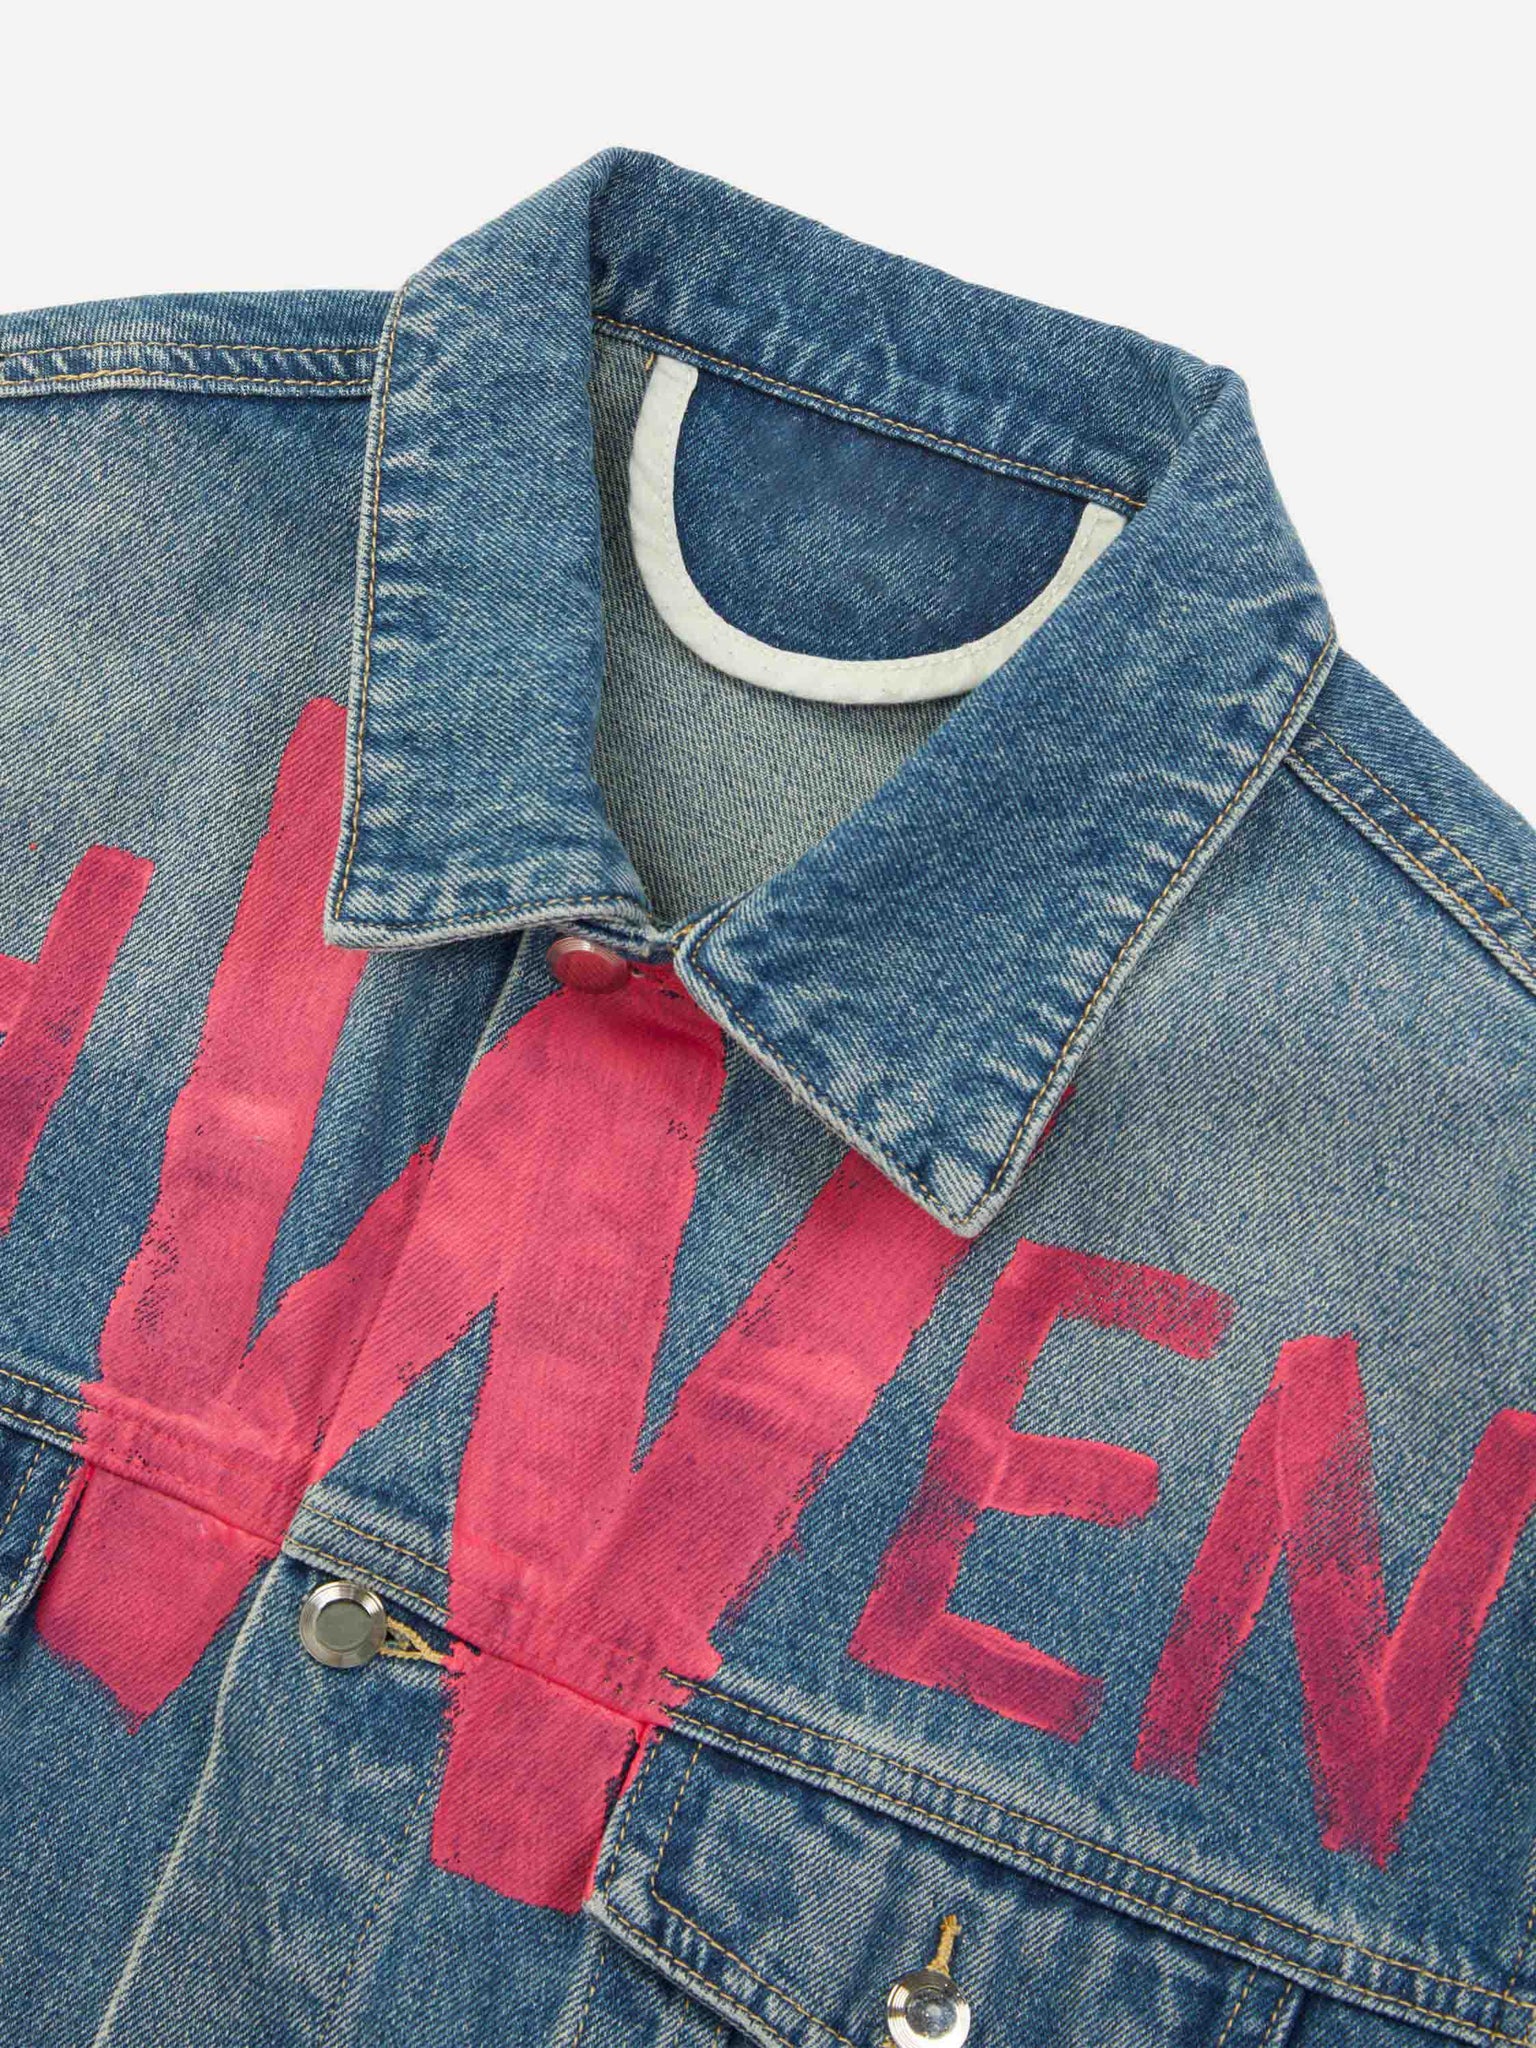 Thesupermade High Street Graffiti Lettered Distressed Washed Denim Jacket